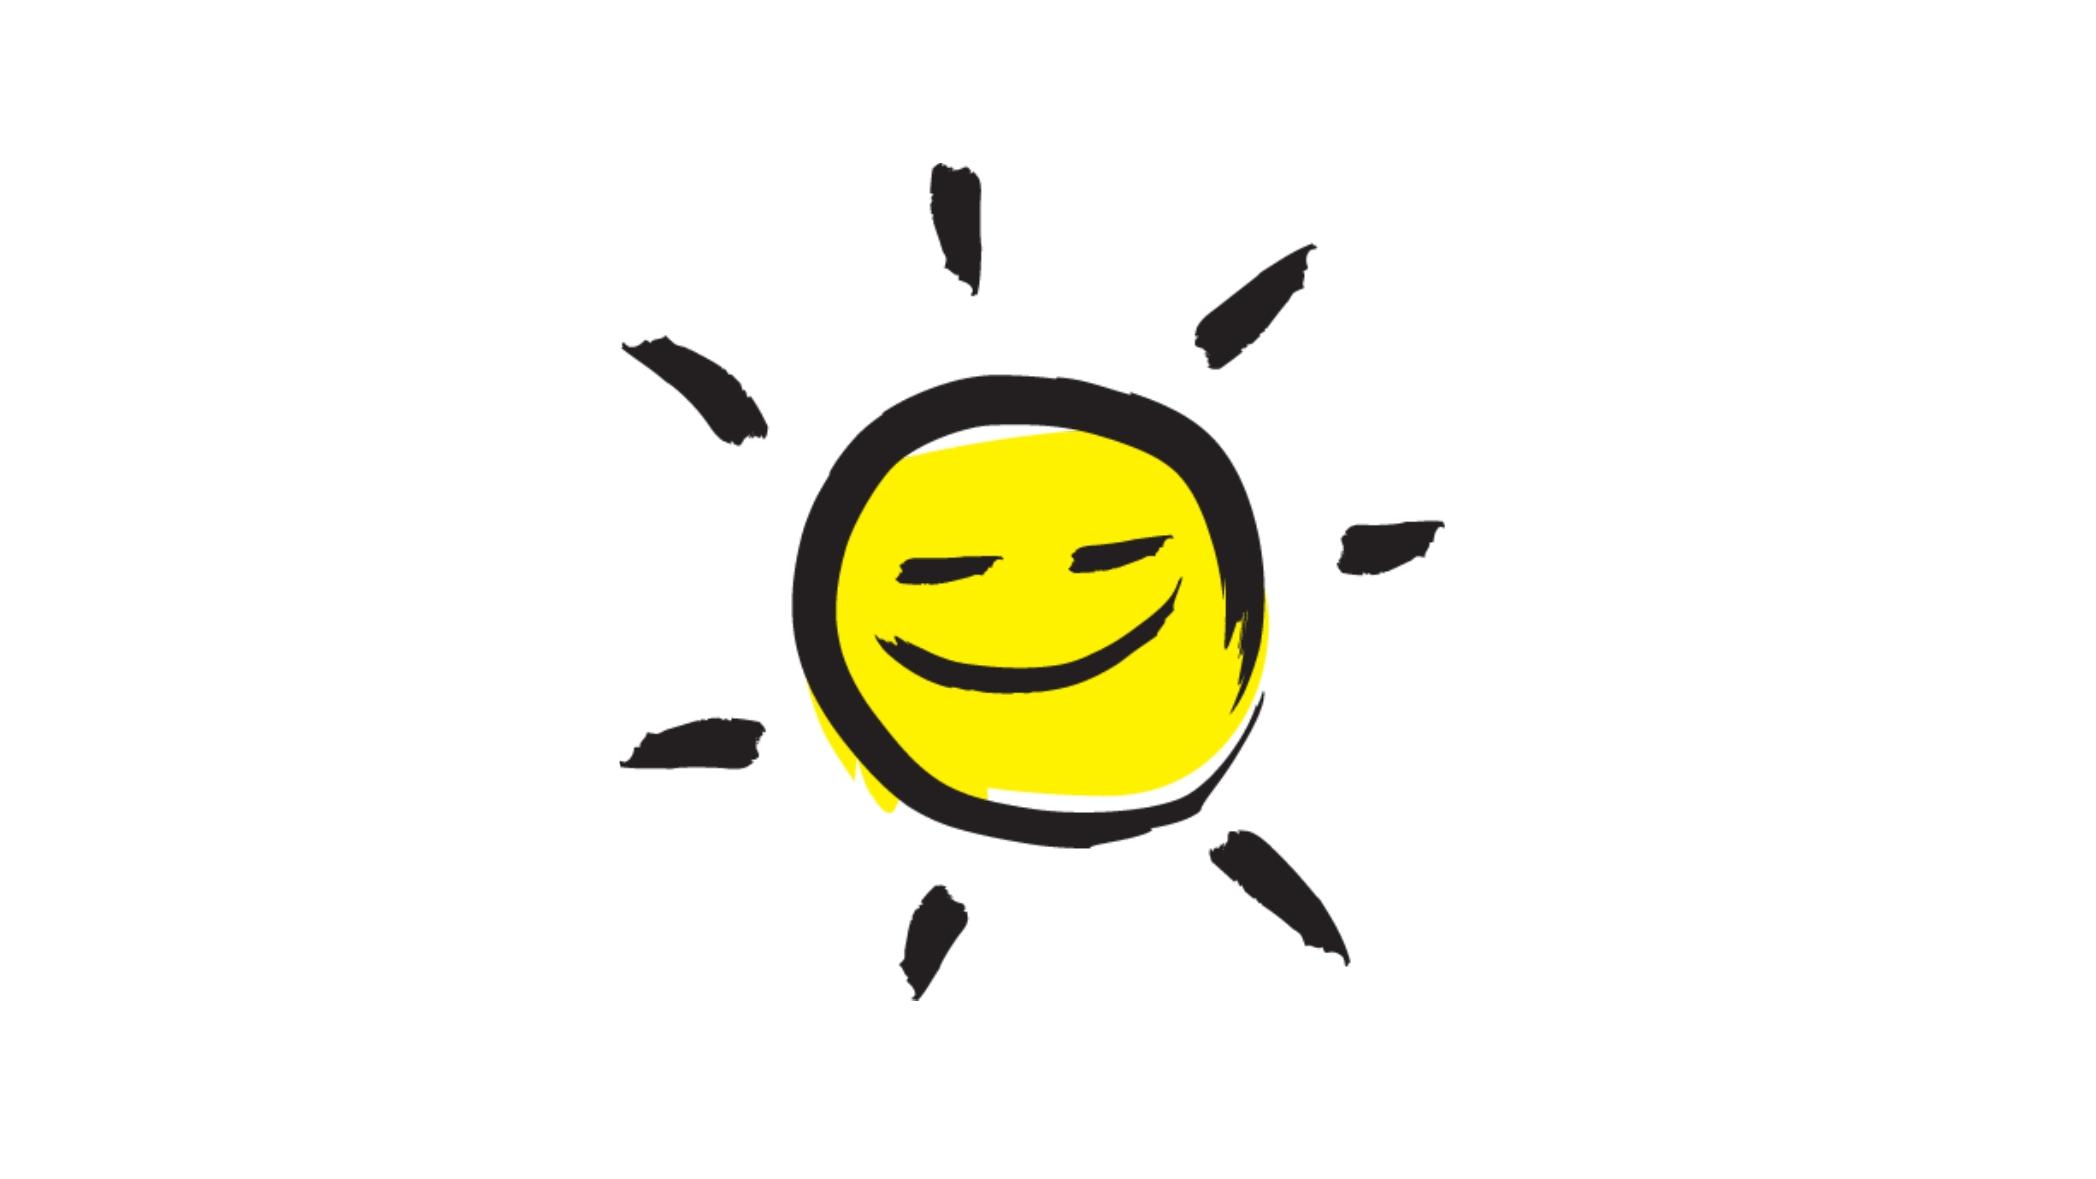 An illustration of a smiling sunshine icon outlined in a black paintbrush style design with yellow accents.